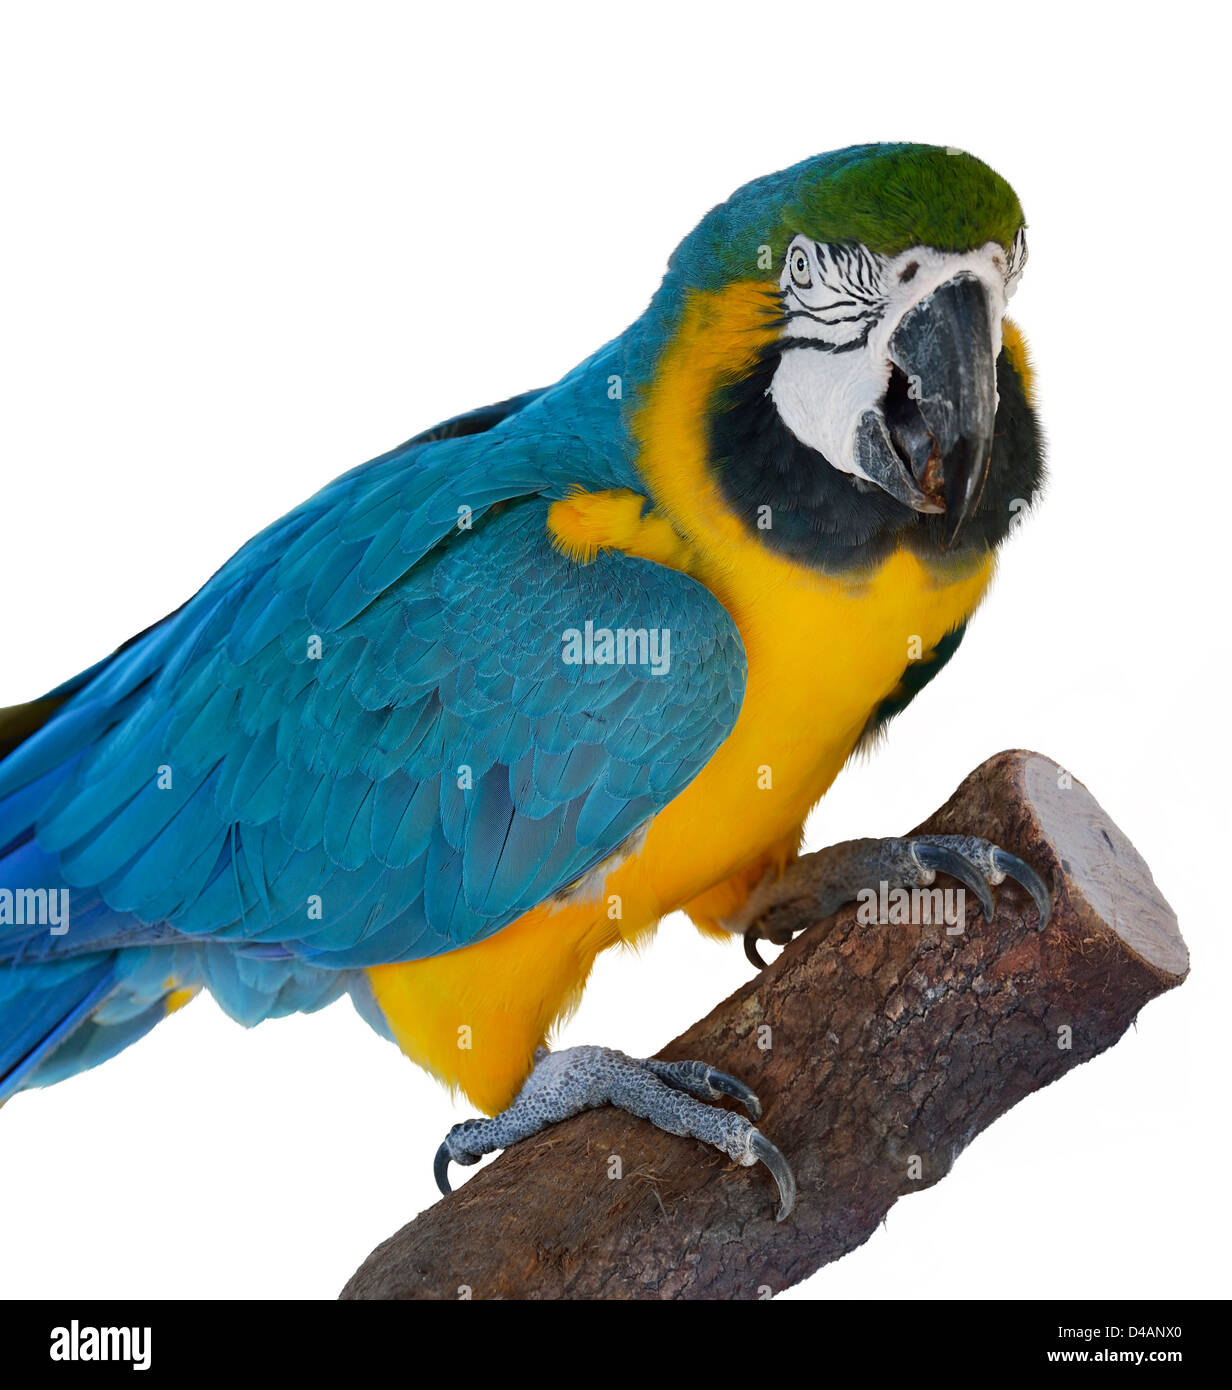 Colorful Blue Parrot Macaw On White Background Stock Photo